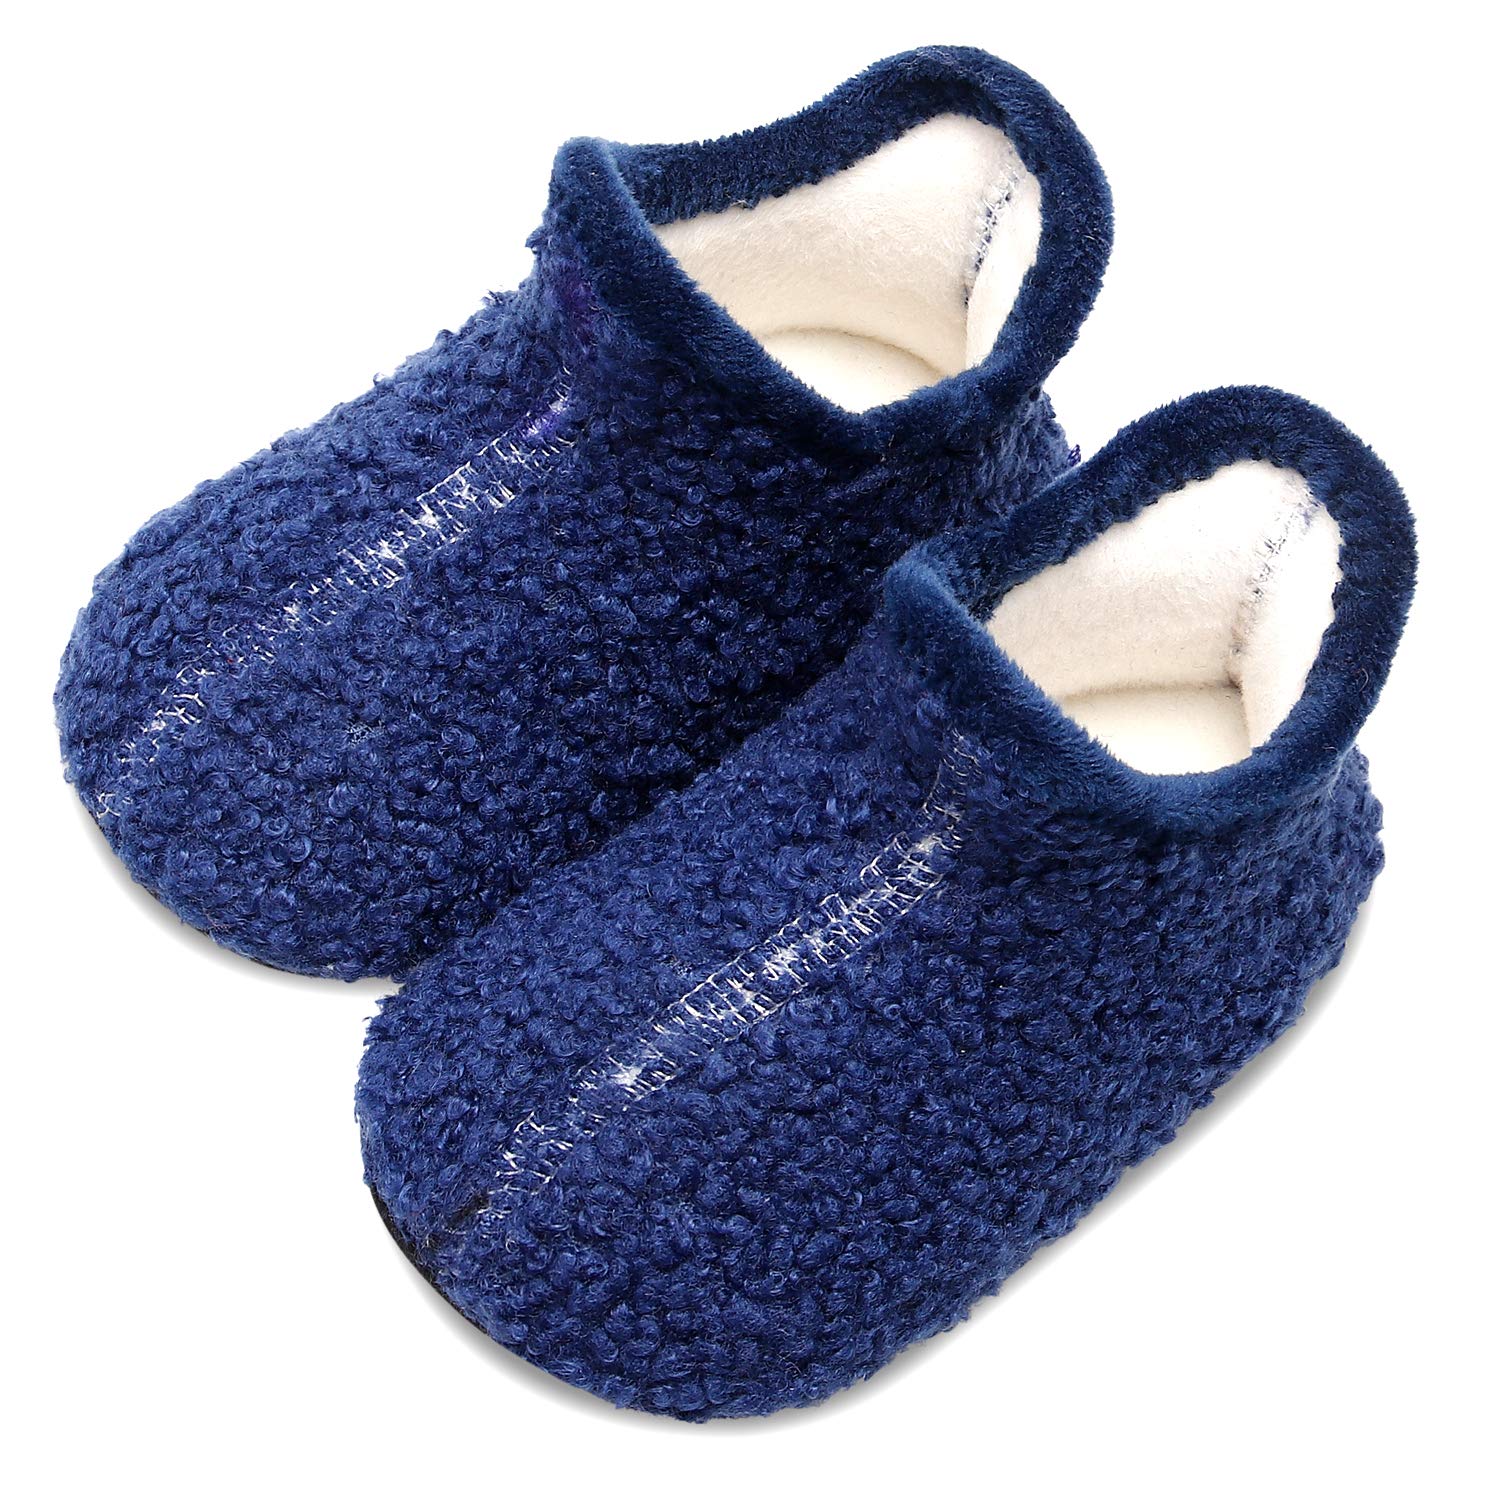 Scurtain Kids Toddler Slippers Socks Artificial Woolen Slippers for Boys Girls Baby with Non-Slip Rubber Sole